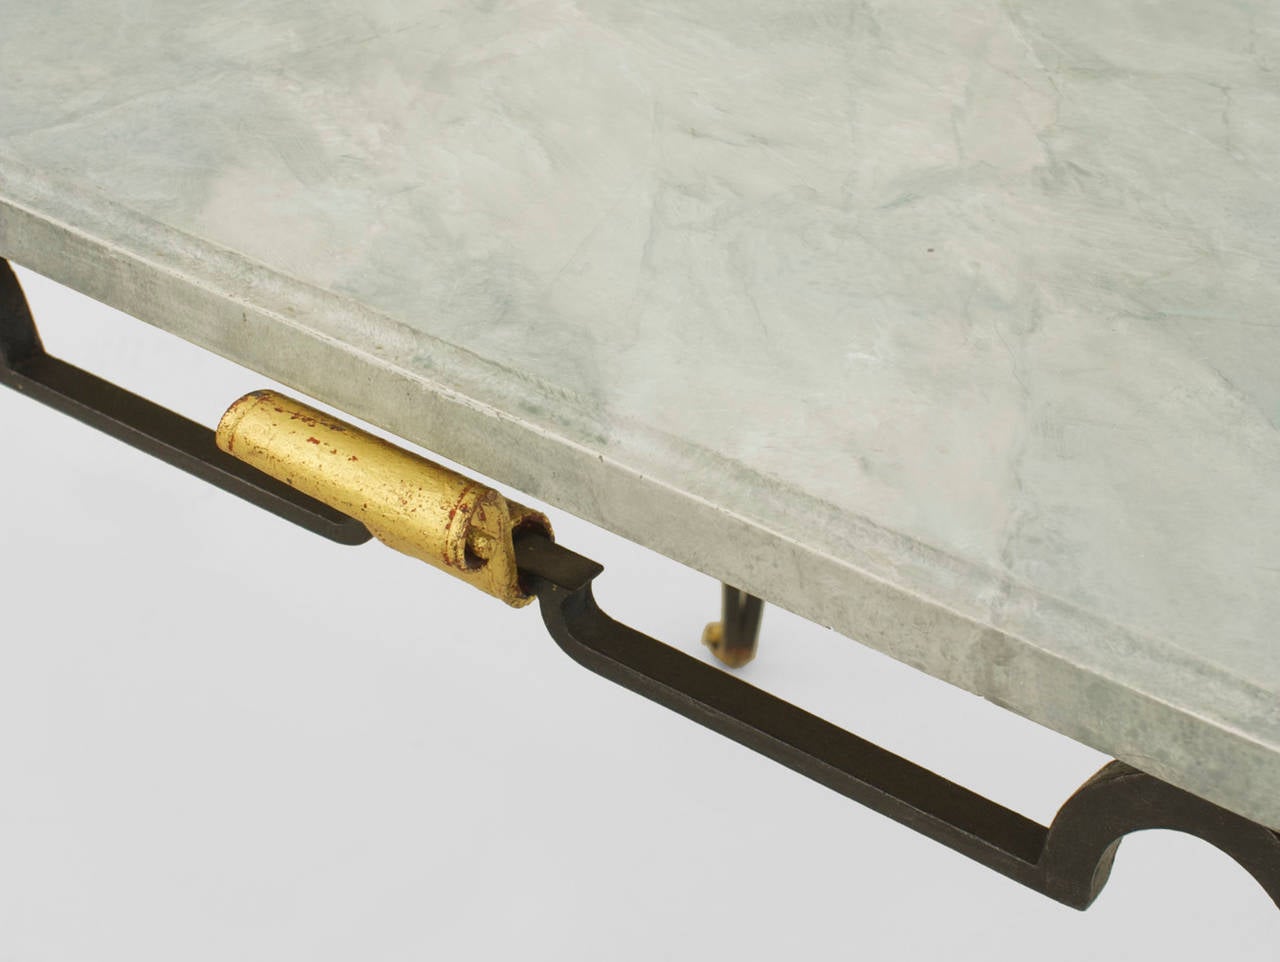 French 1940s square iron game table with open scroll design legs and gilt metal trim supporting a faux green painted travertine top (attributed to RENE PROU).
